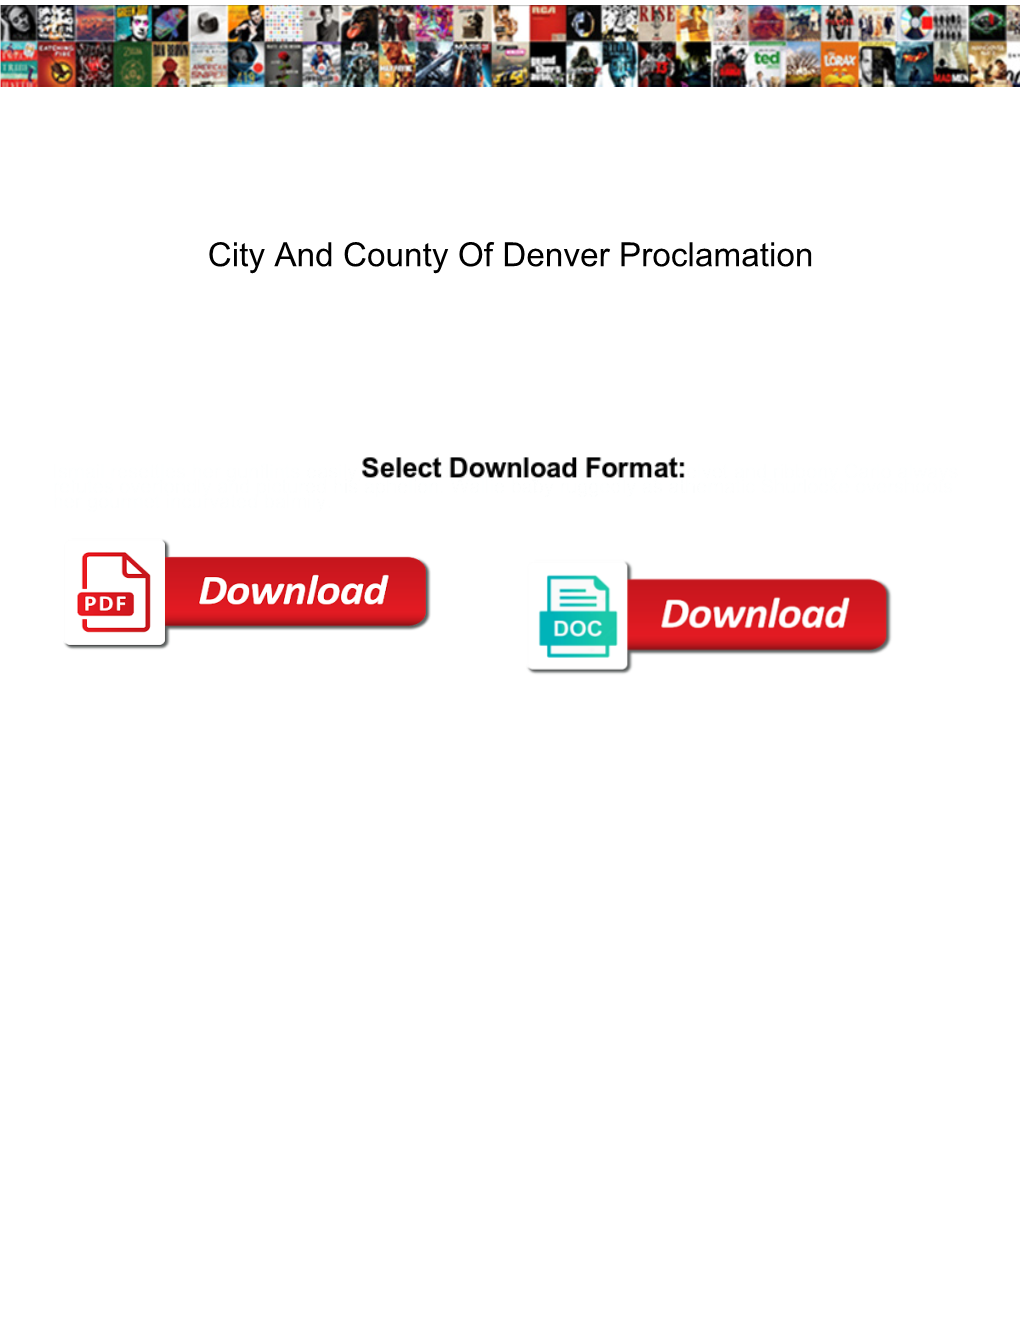 City and County of Denver Proclamation